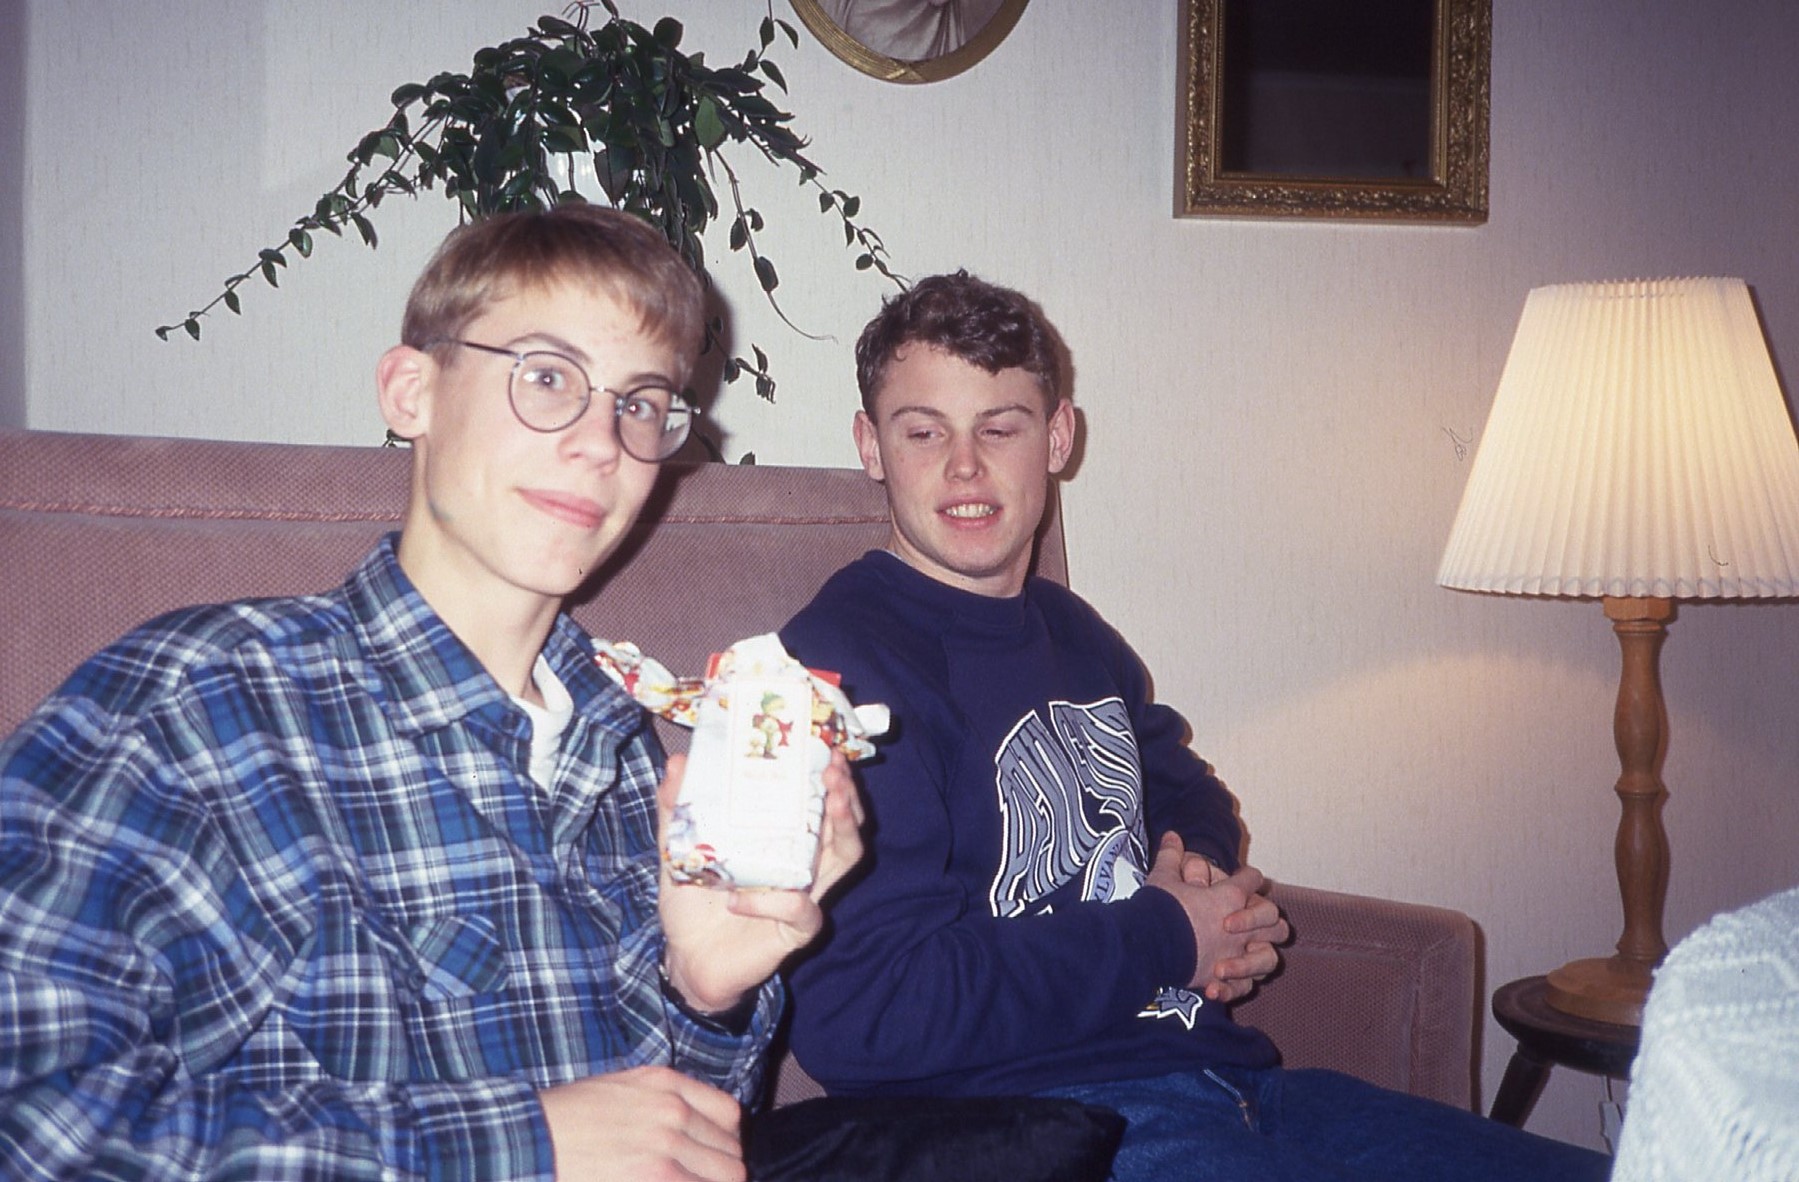 two men sitting on a couch, one holding an object